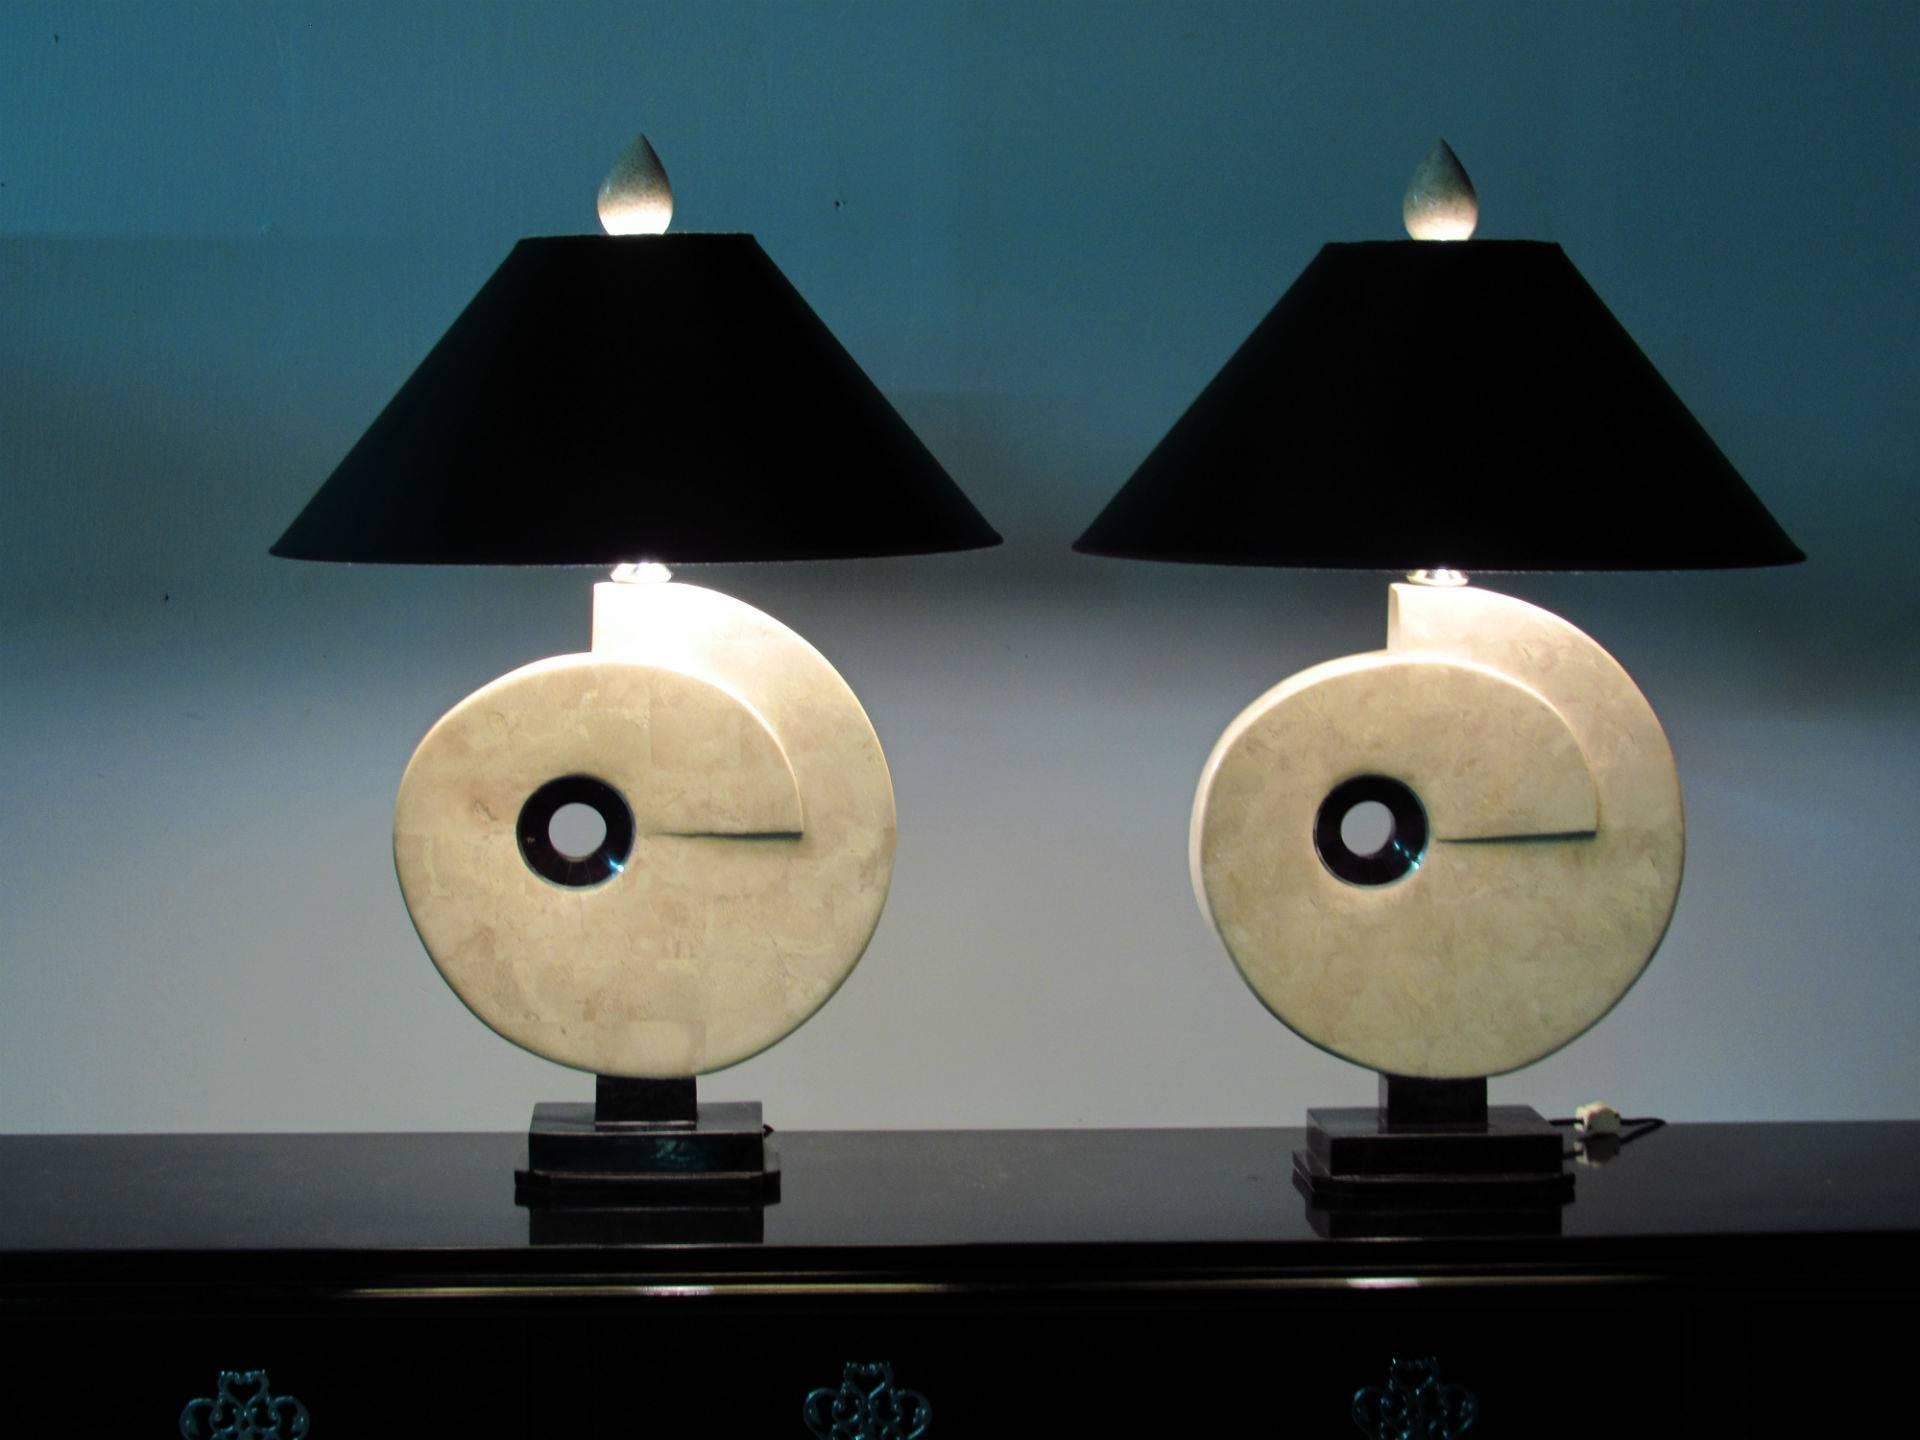 Beautiful tessellated fossil stone over wood Nautilus table lamps from Robert Marcius for Kinder Harris.   Fossil stone sections, black marble centers and polished nickel hardware.   